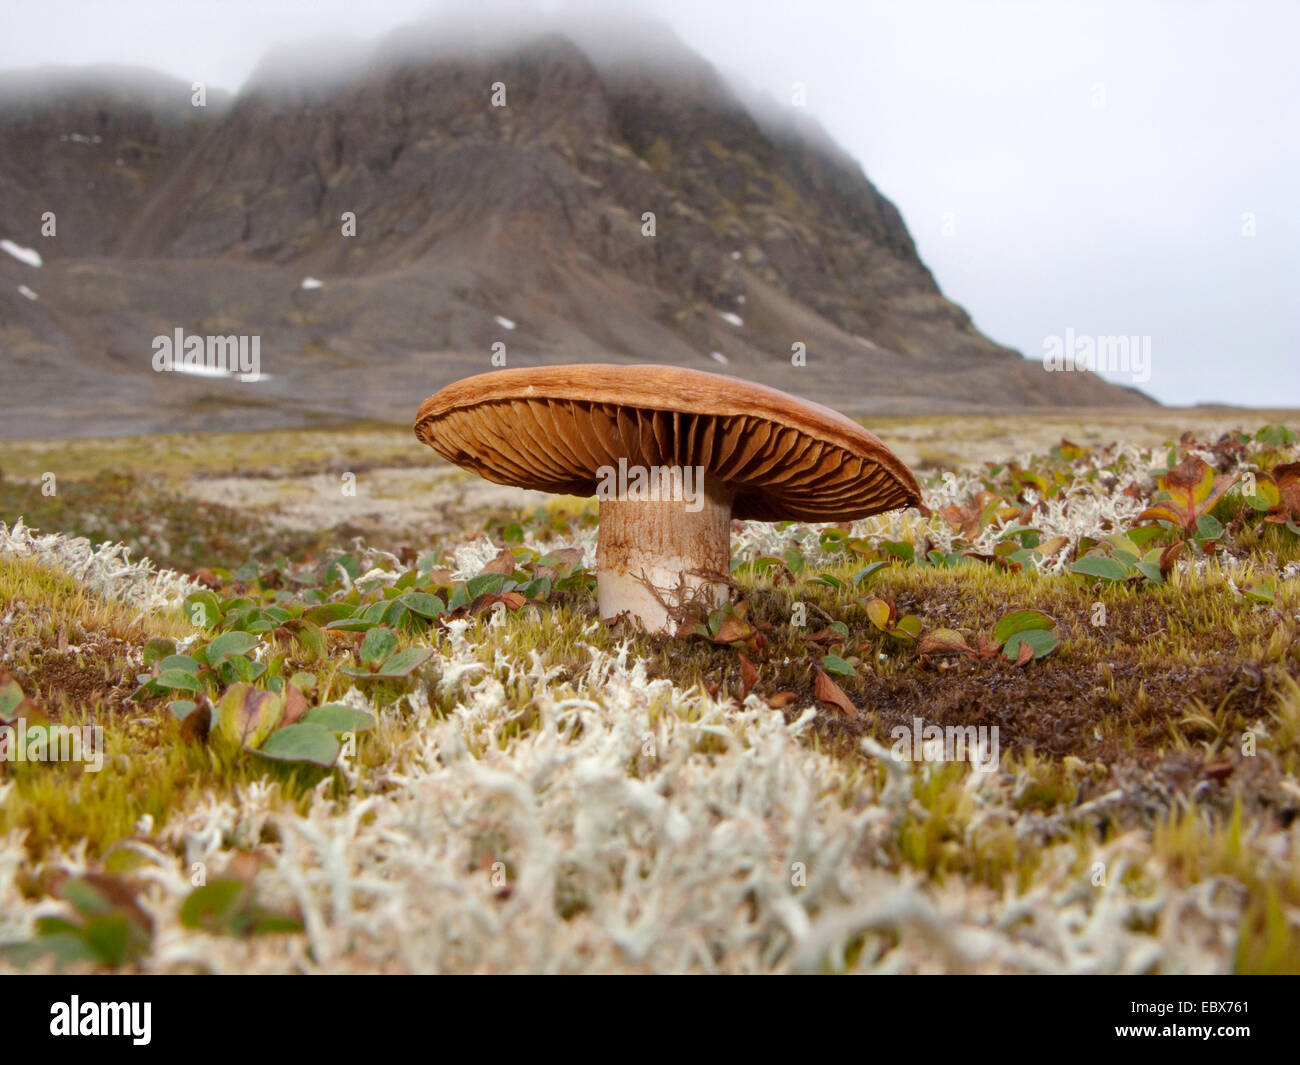 net-leaved willow, netted willow, net-veined willow (Salix reticulata), mushroom growing in netted willows and lichens in front of mountain range, Norway, Svalbard, Fuglehuken Stock Photo